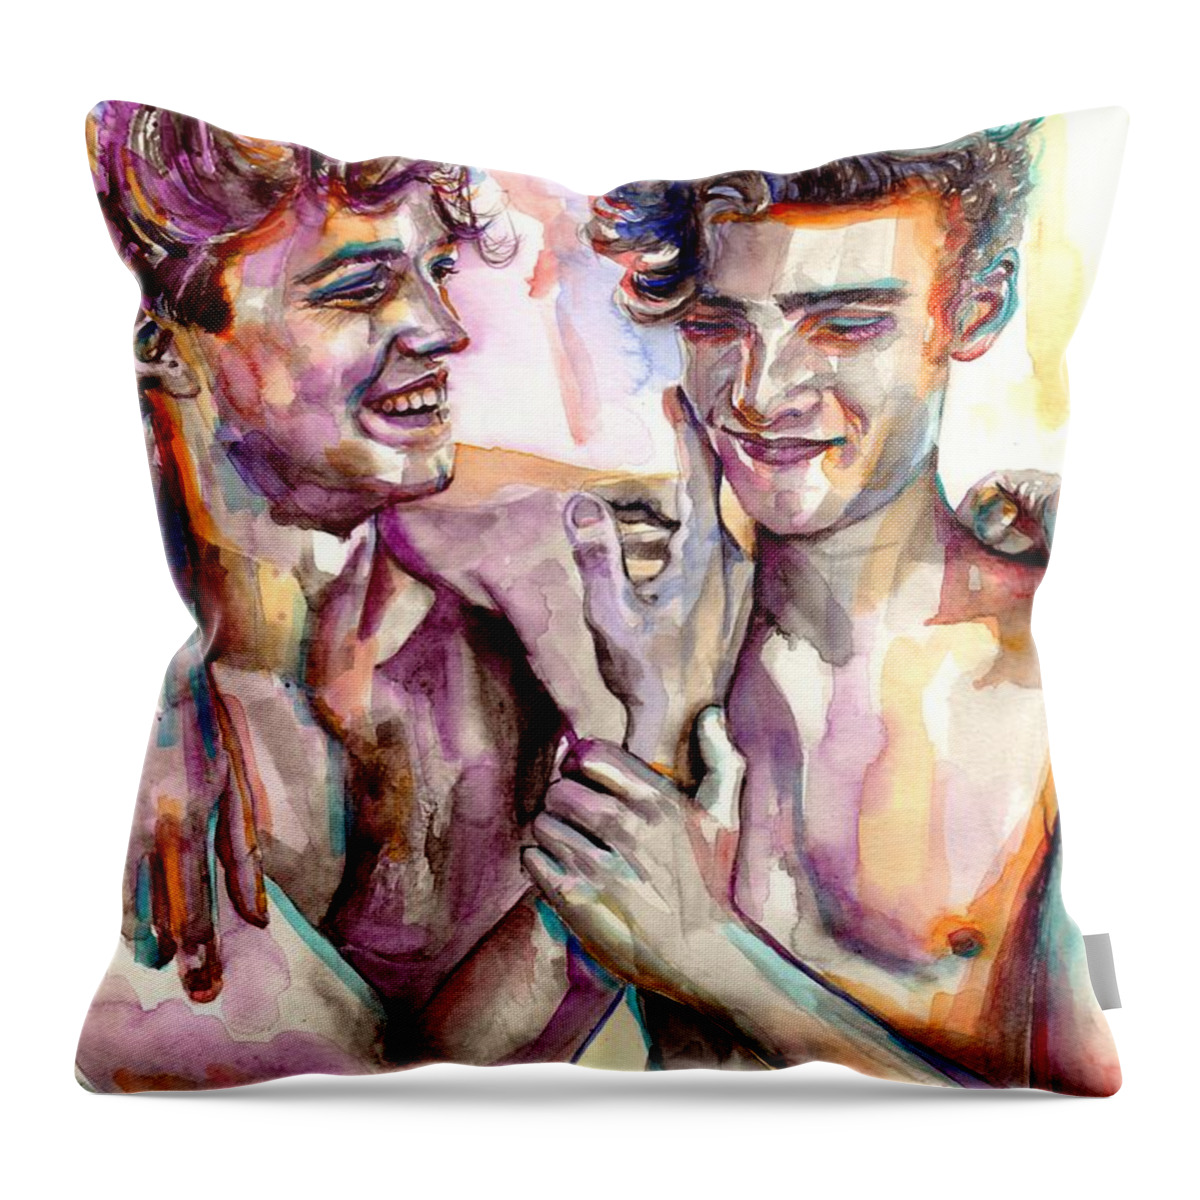 Love Throw Pillow featuring the painting Music In Your Eyes by Suzann Sines